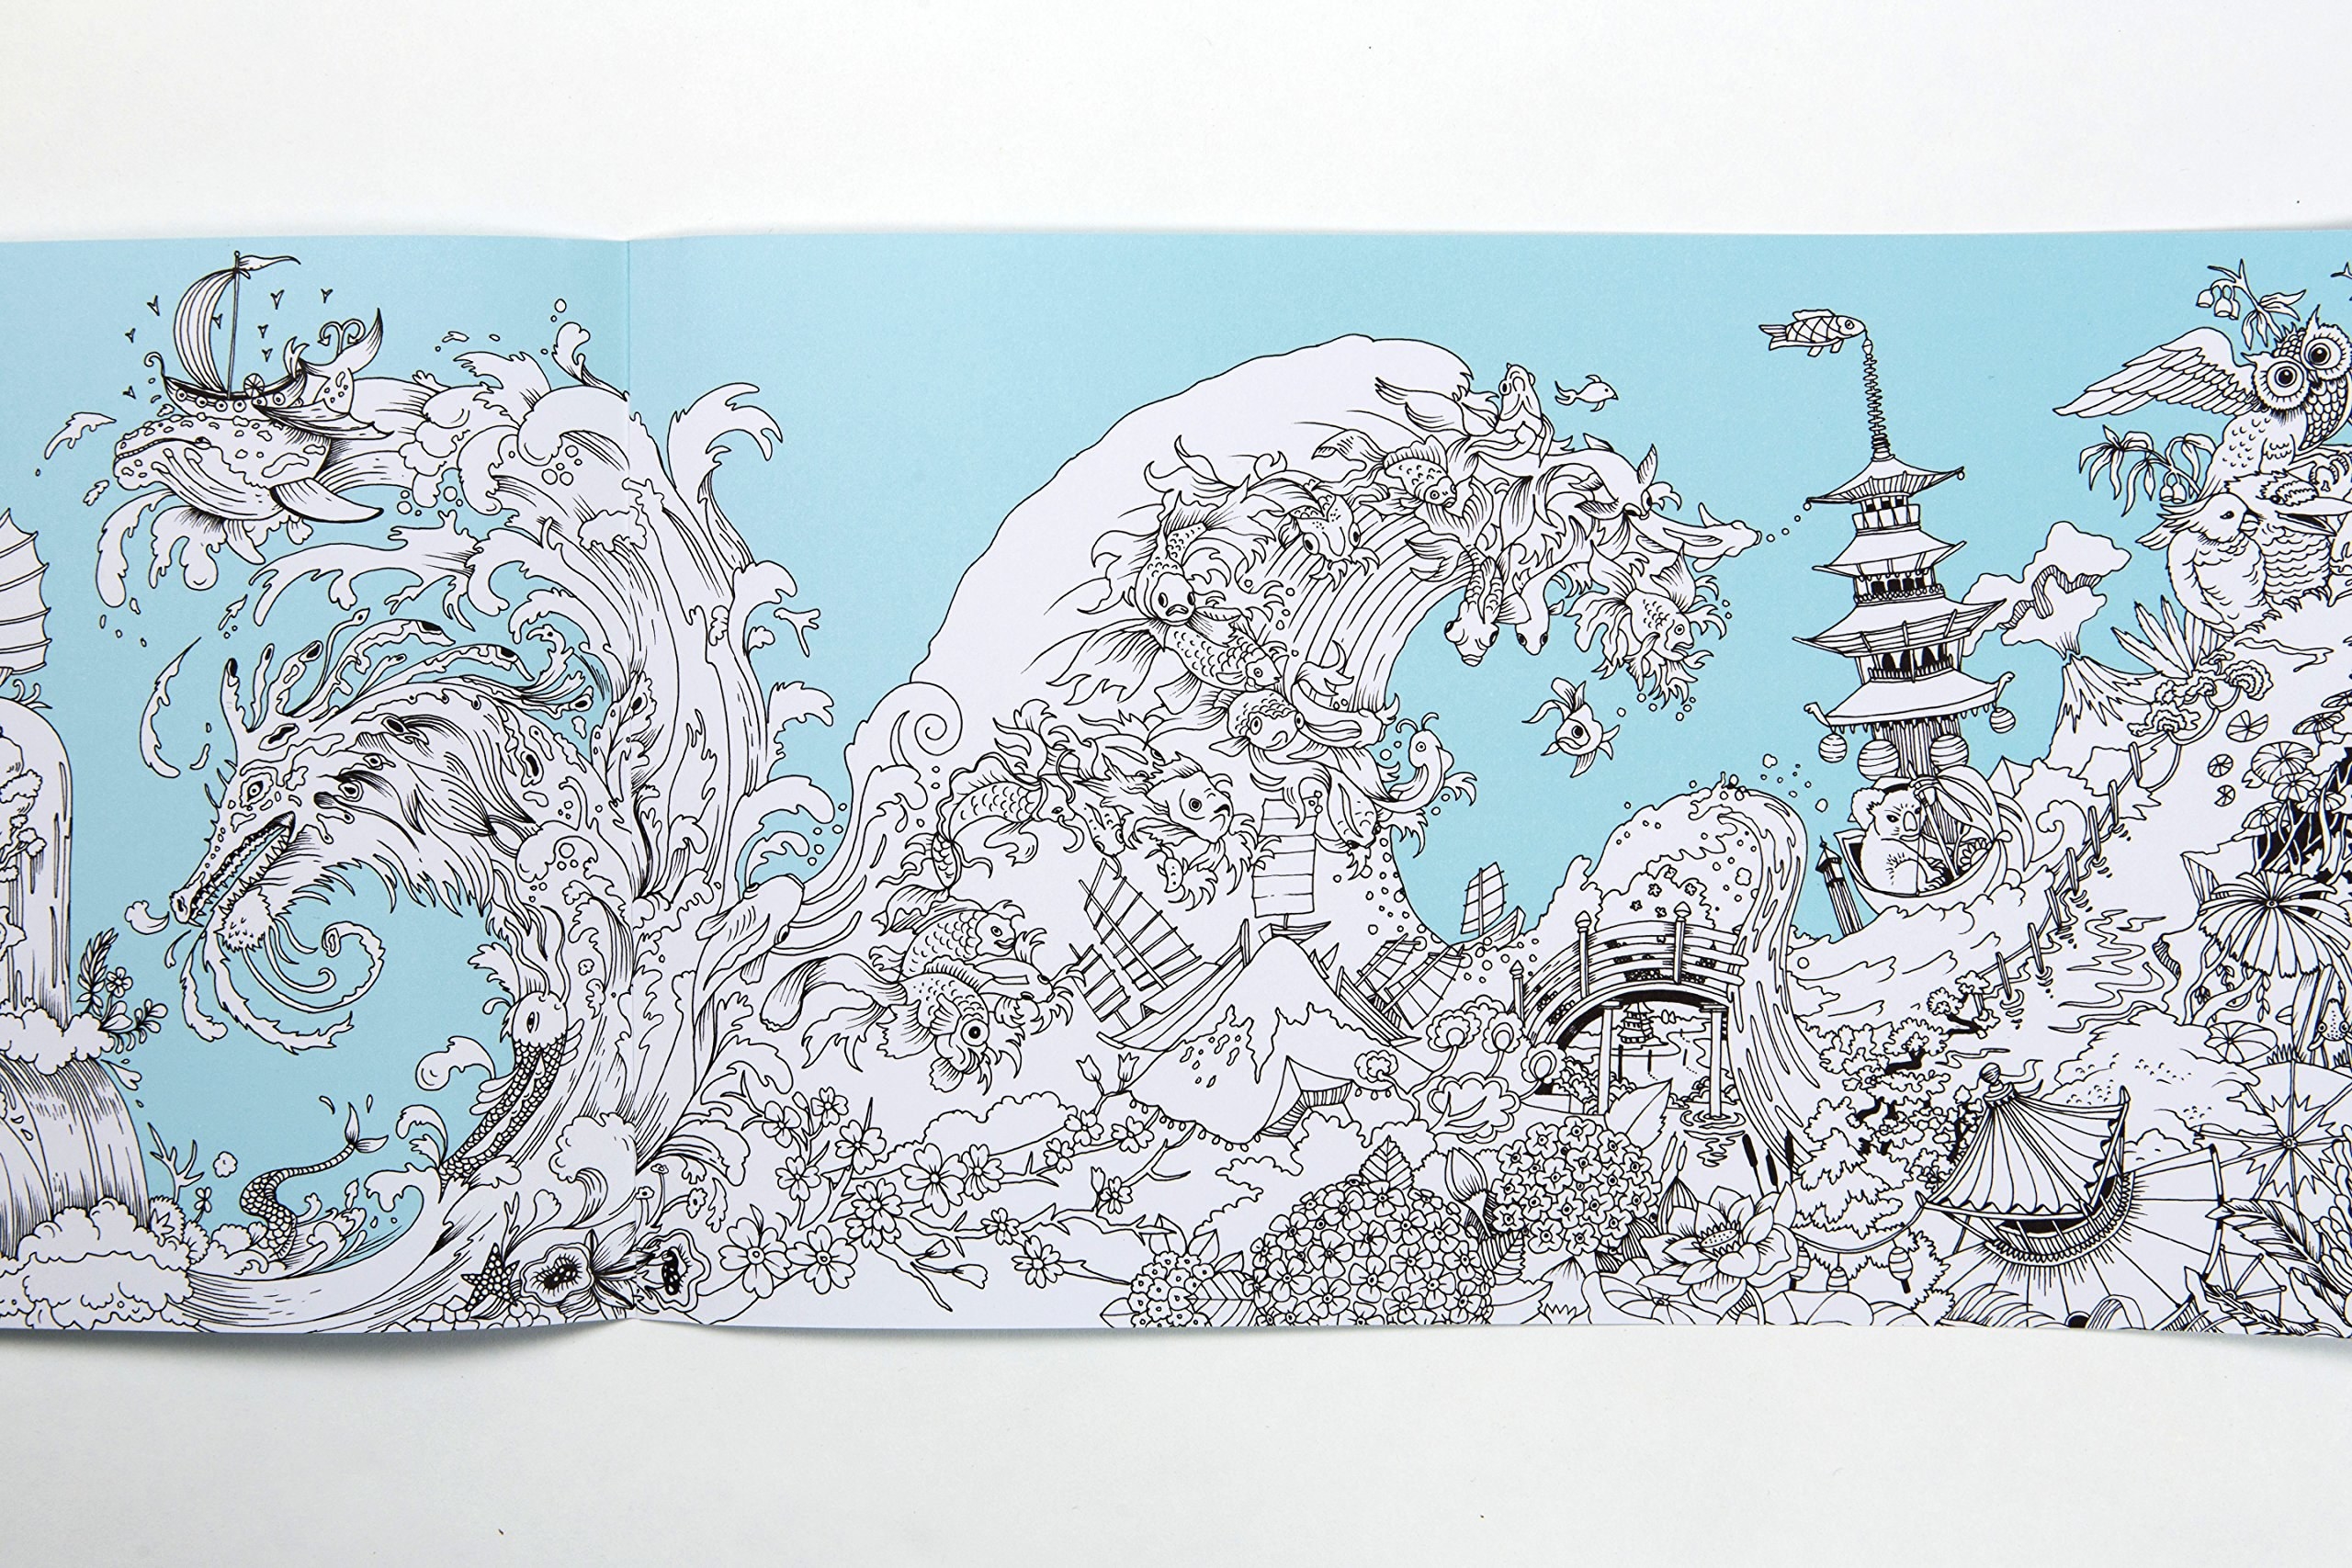 The coloring book spread out showing the detail